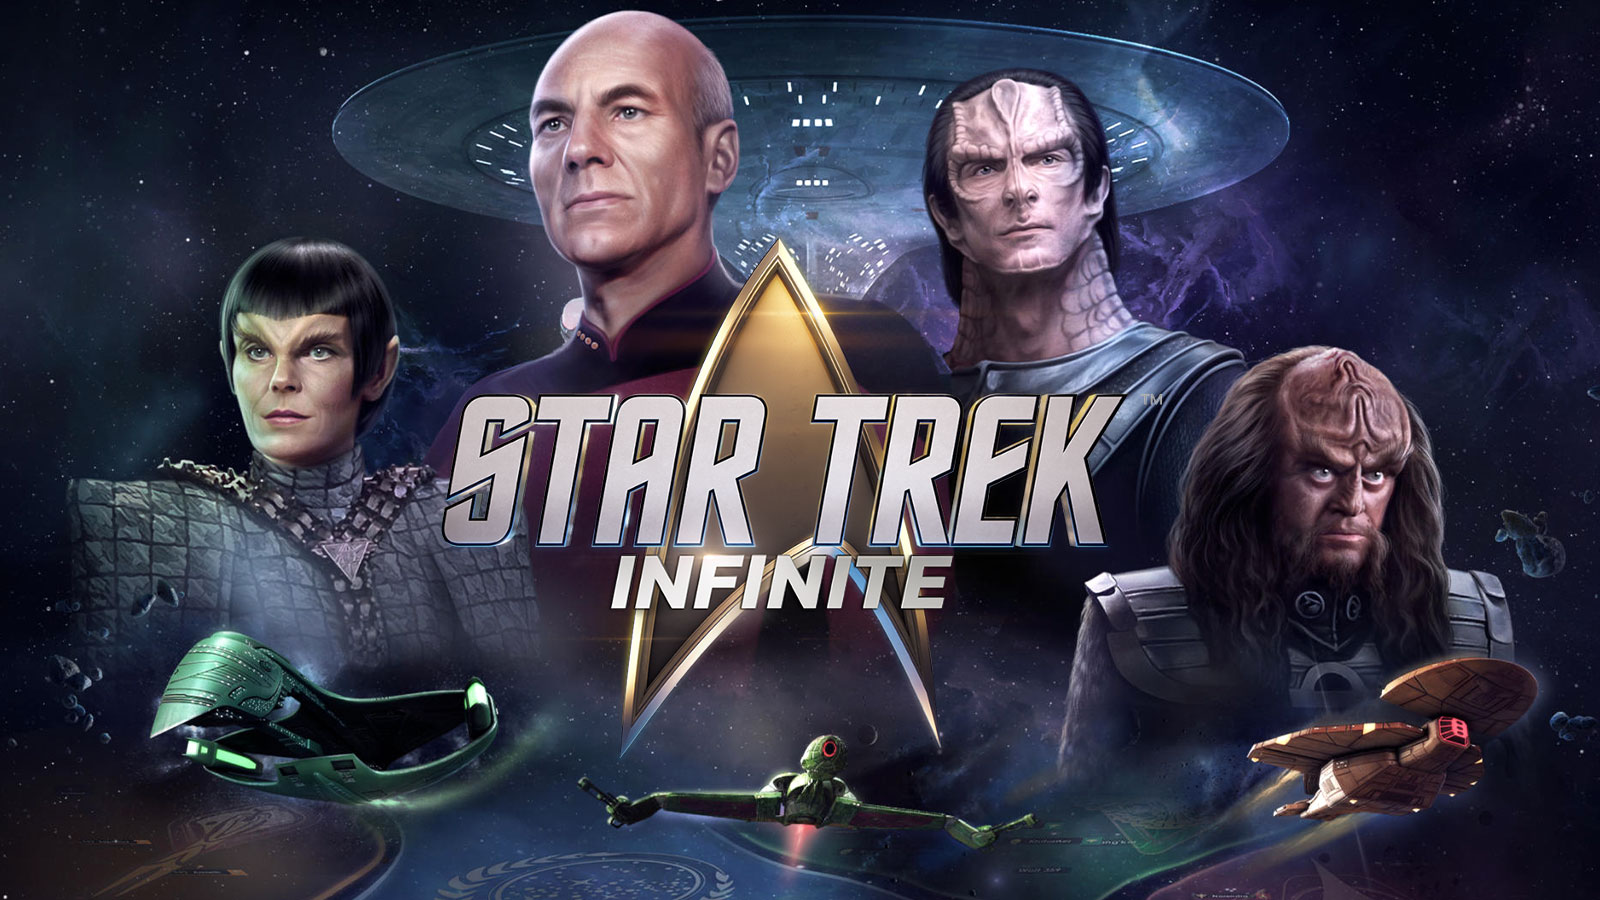 'Star Trek: Infinite' strategy game revealed, set to be released this fall